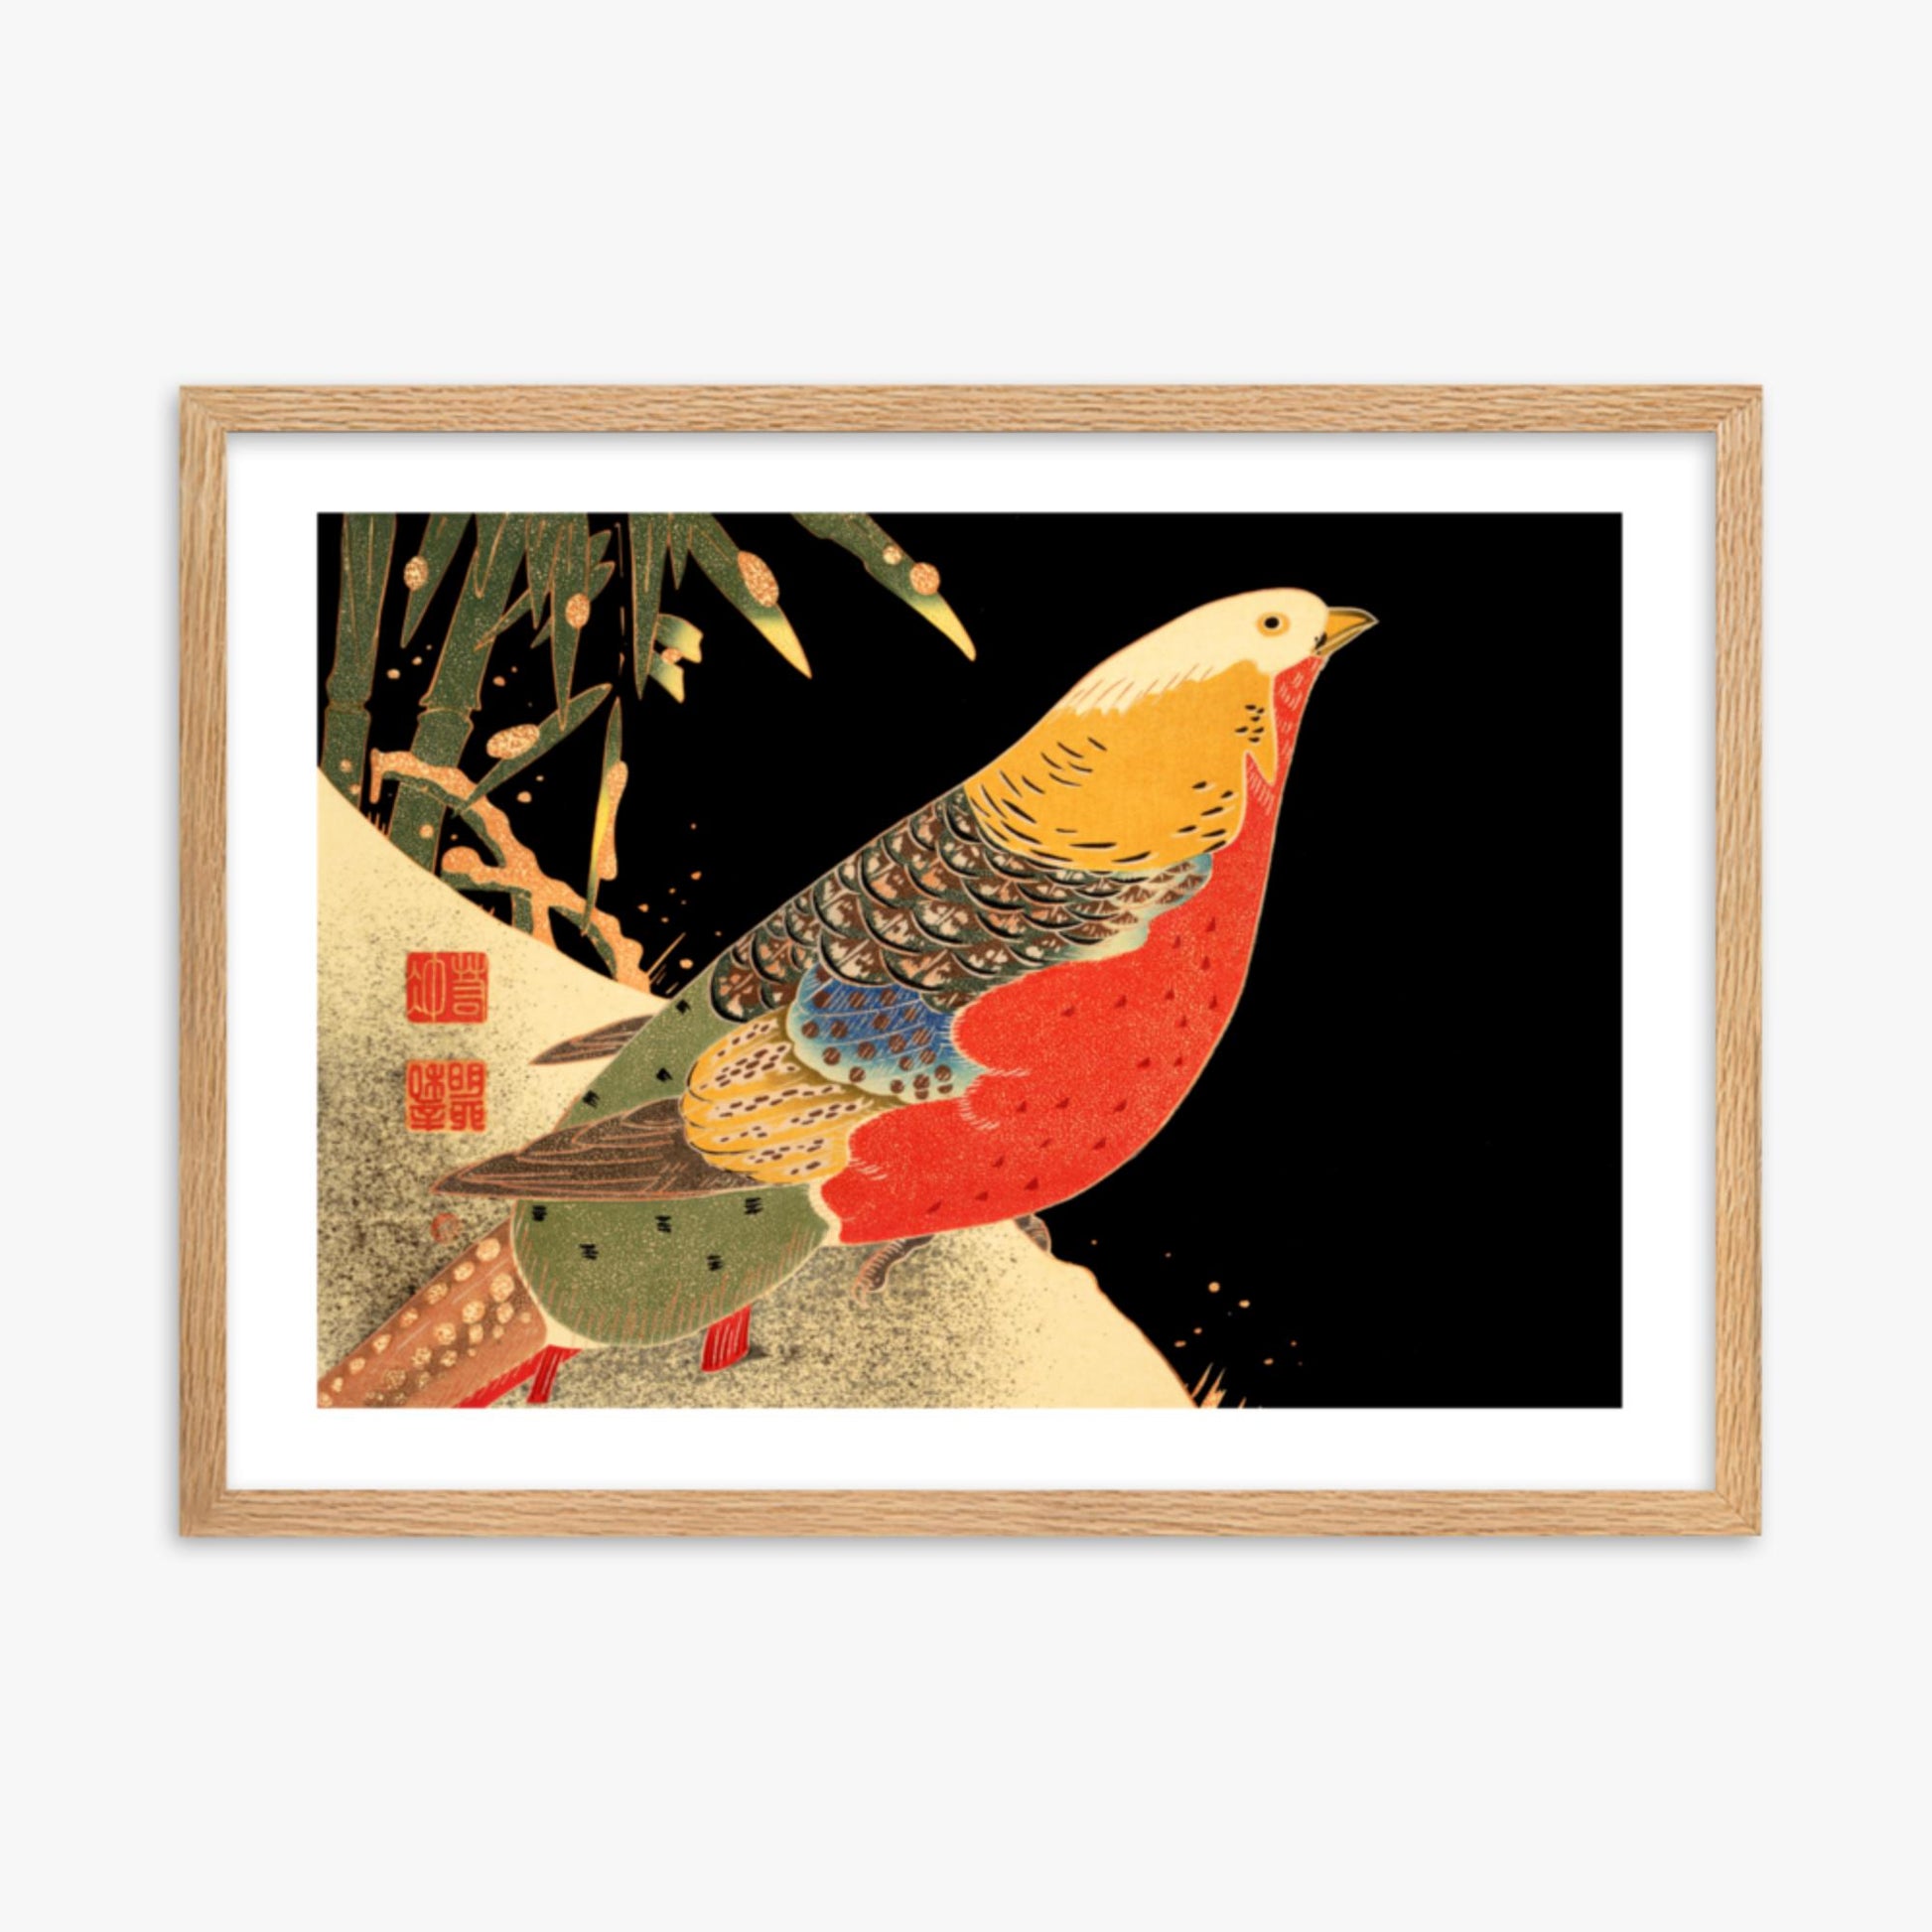 Ito Jakuchu - Golden Pheasant in the Snow 50x70 cm Poster With Oak Frame